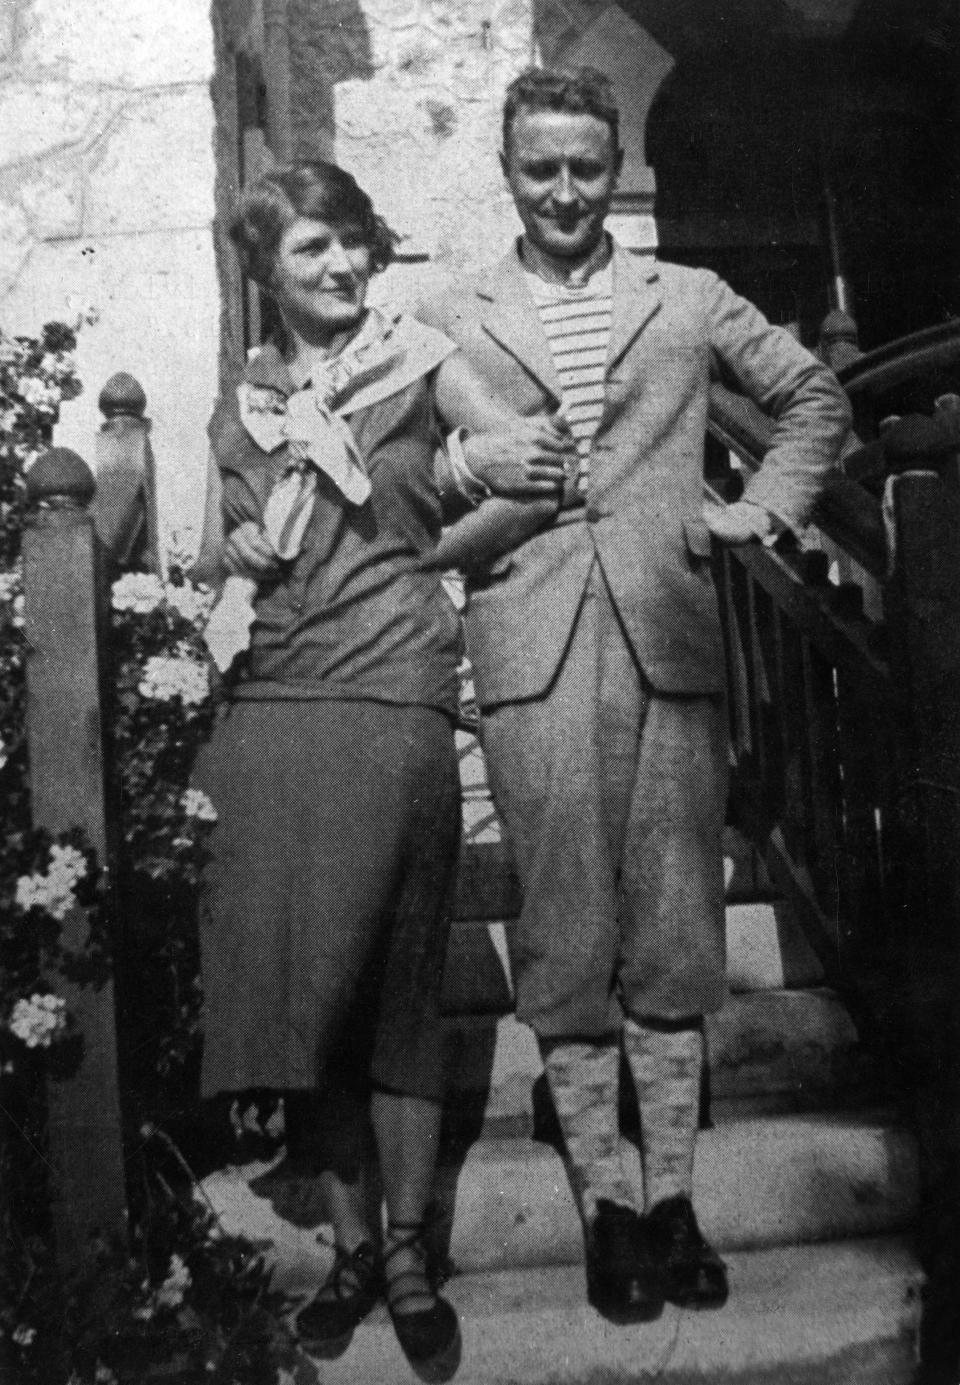 F. Scott Fitzgerald and his wife, Zelda Sayre, link arms in 1926.